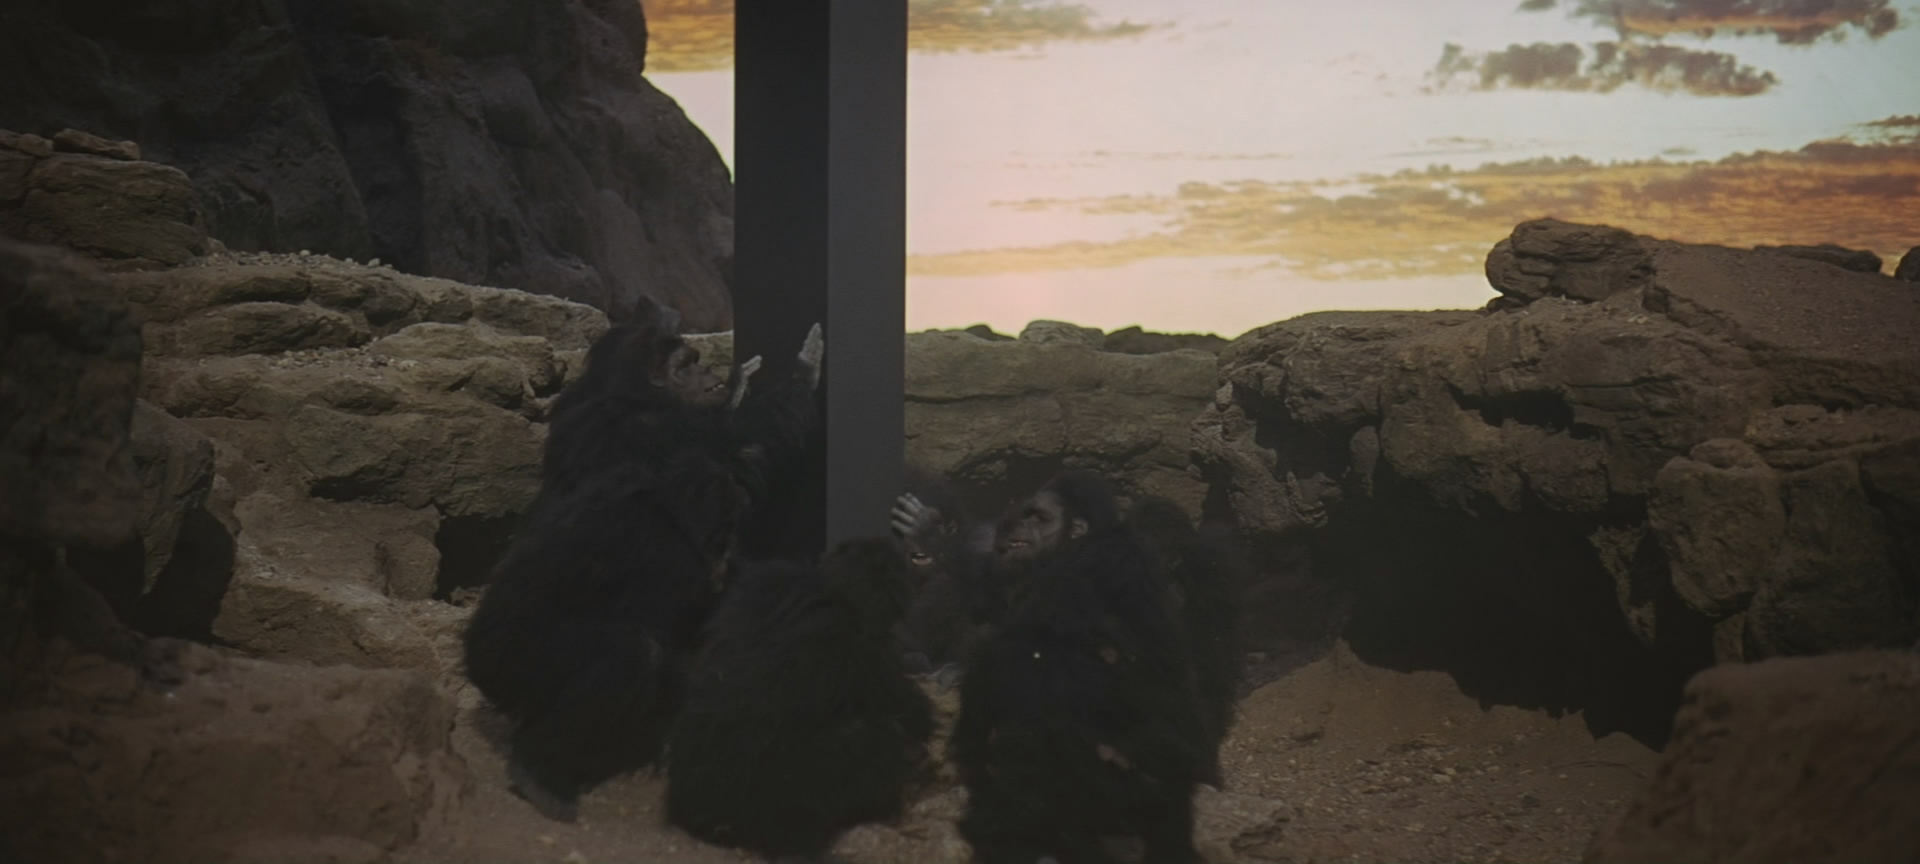 2001_a-space-odyssey_dawn-of-man-and-the-monolith.jpg